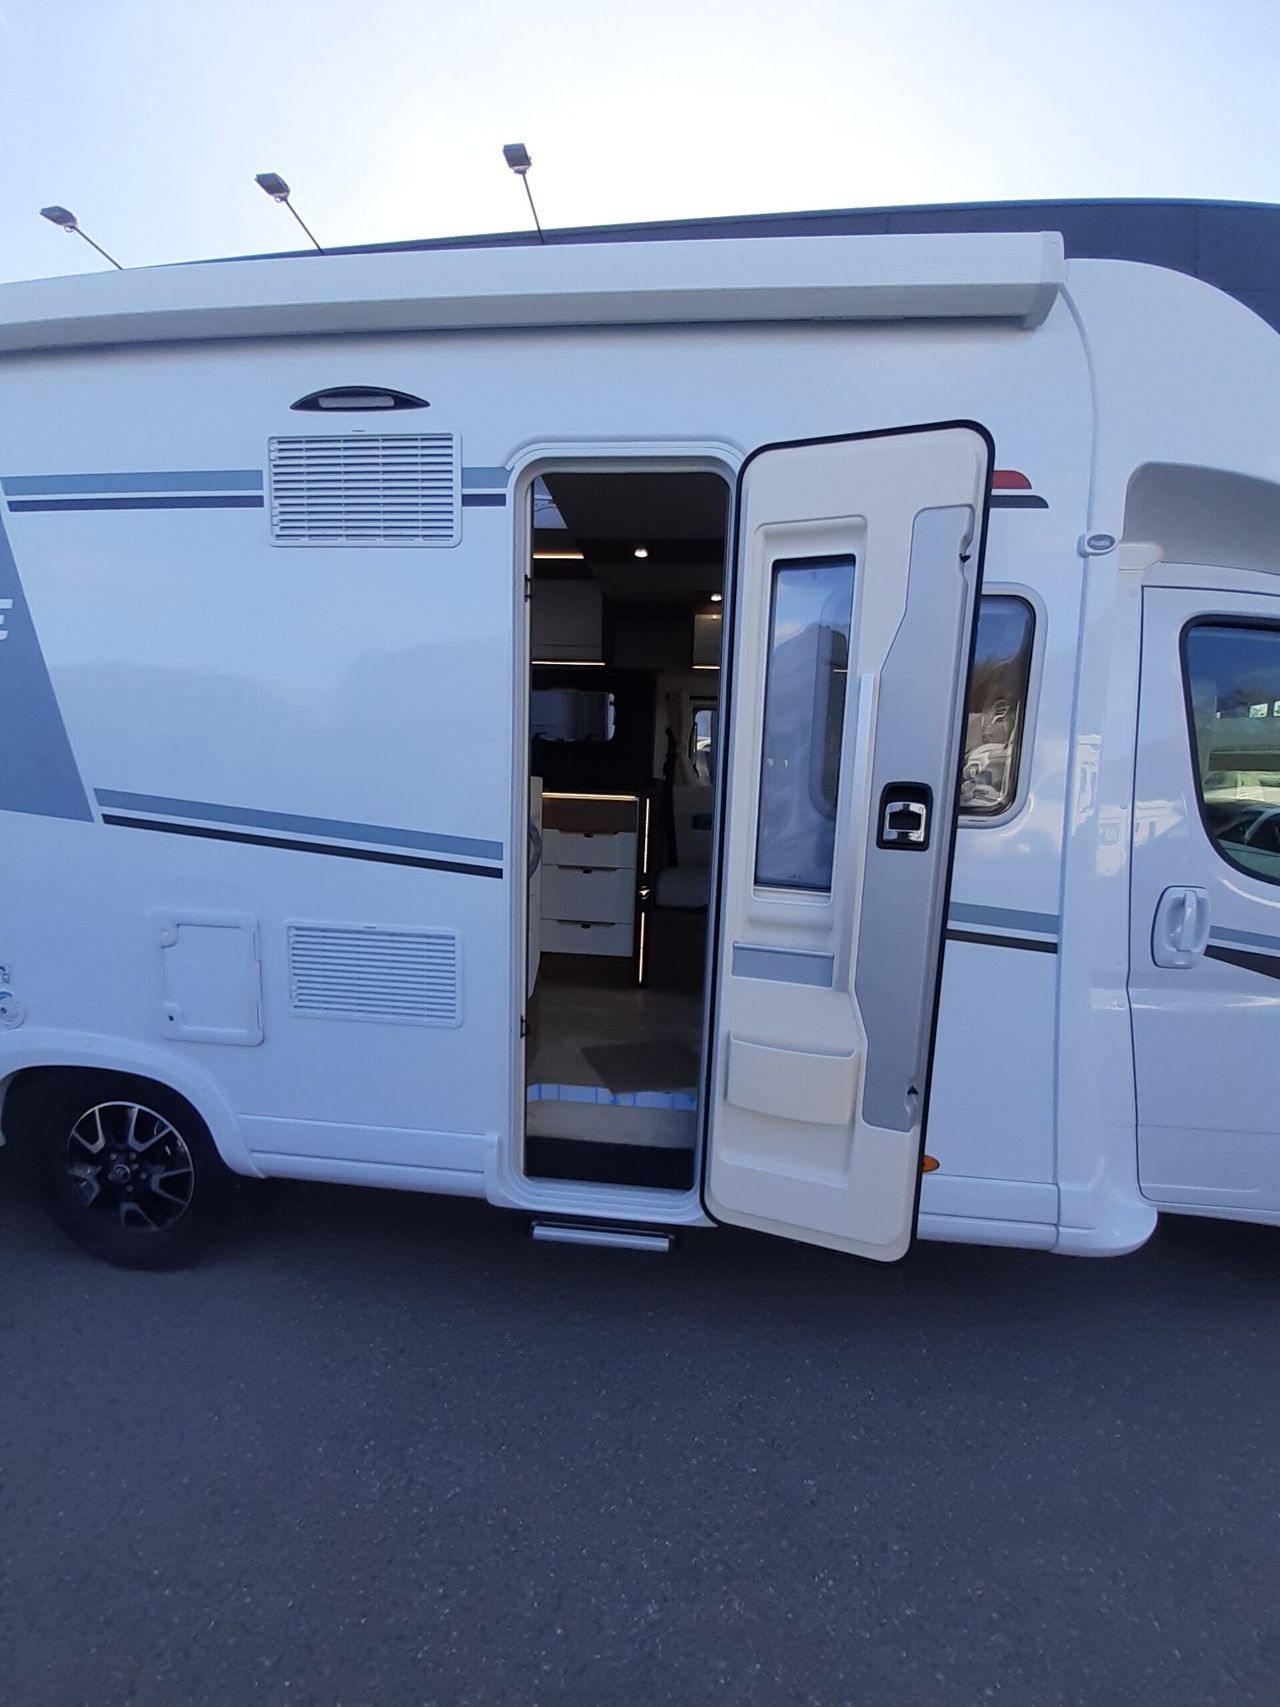 Camping-car - Pilote - P746 FC EVIDENCE 2 000€ D'ACCESSOIRES OFFERTS - 2023